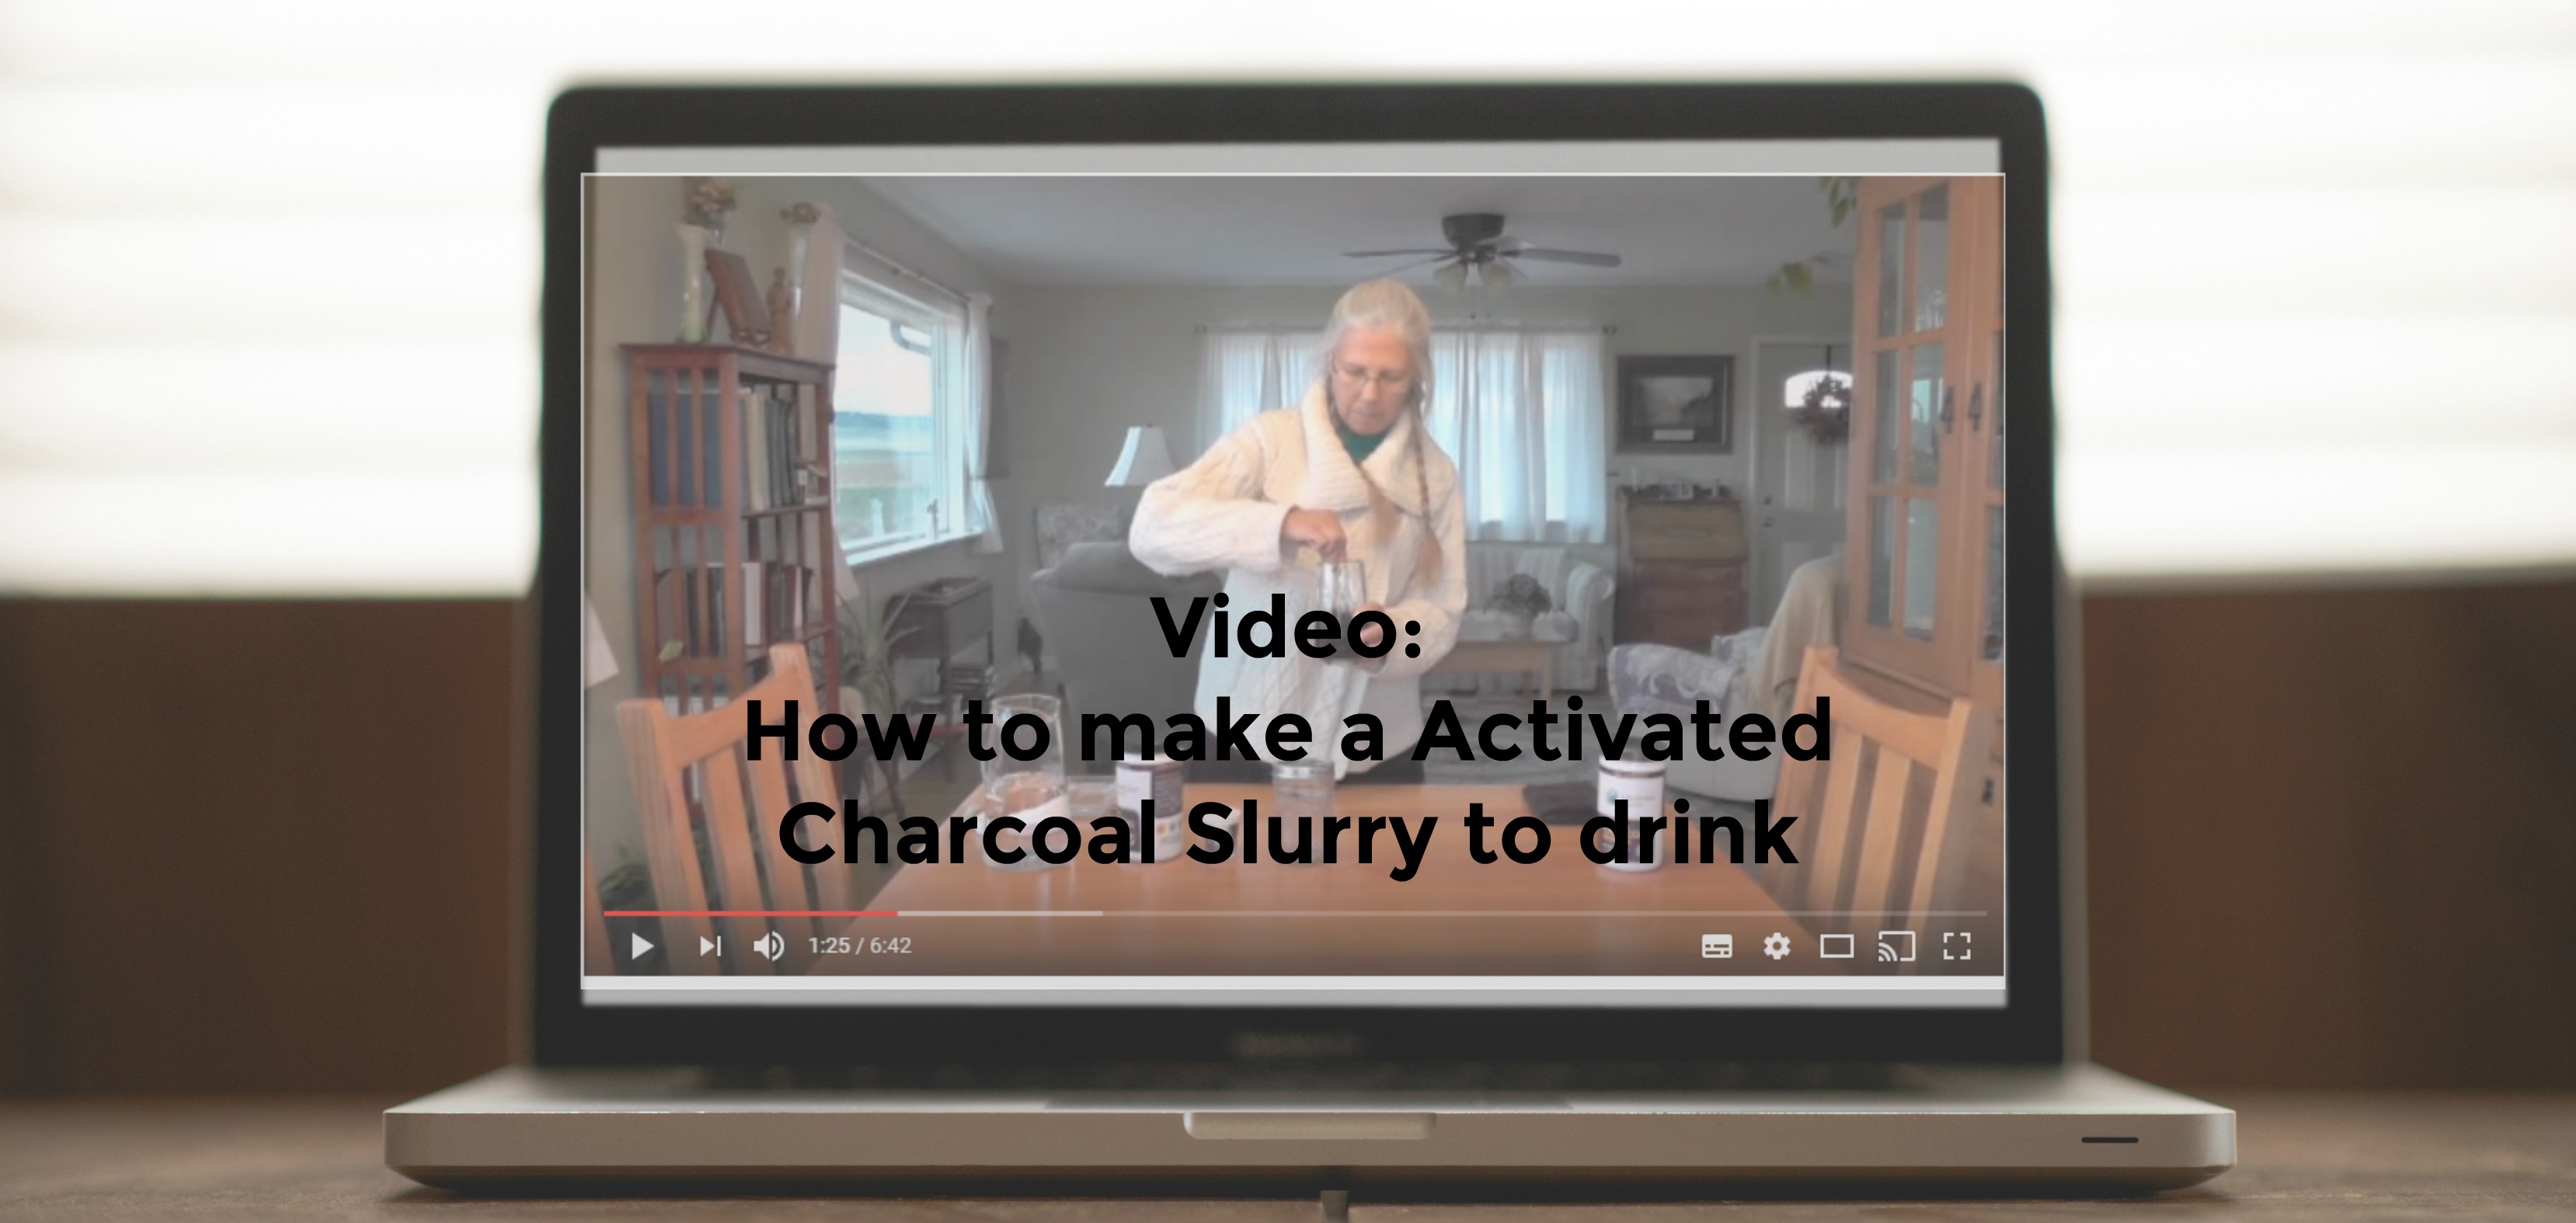 slurry video - Video: How to make a Activated Charcoal Slurry to drink